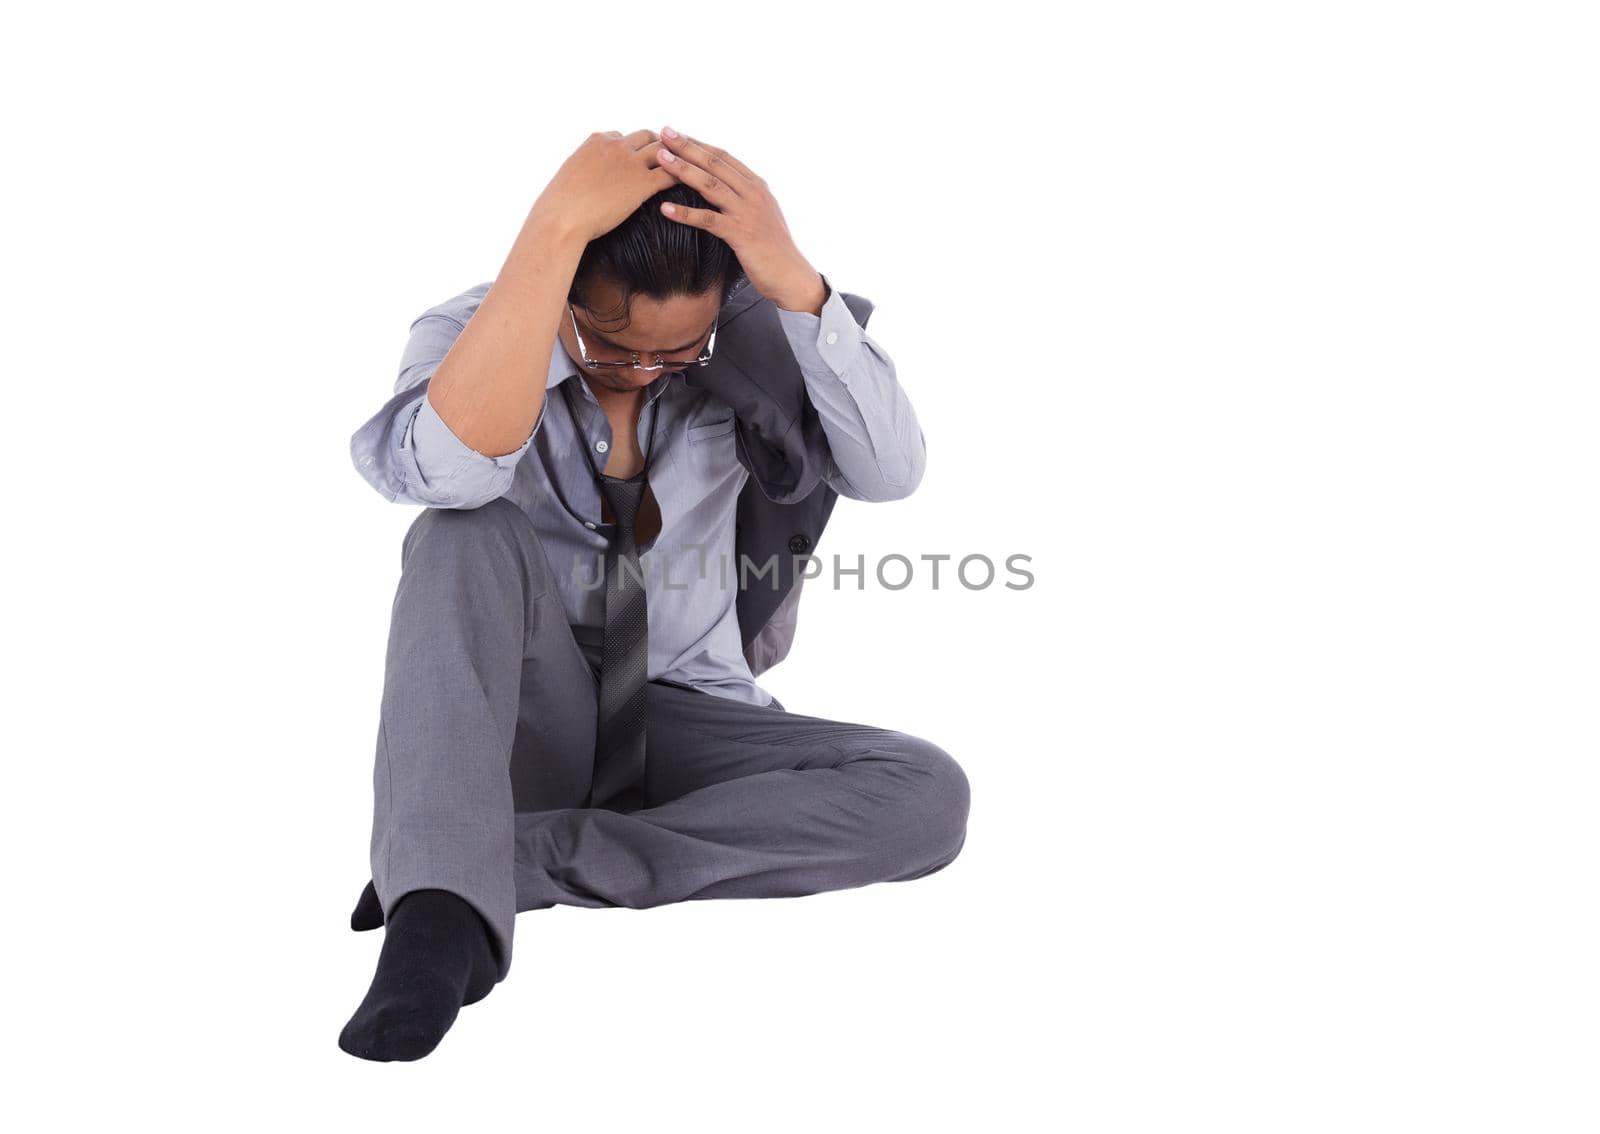 stressed businessman touching his head and thinking isolated on white background